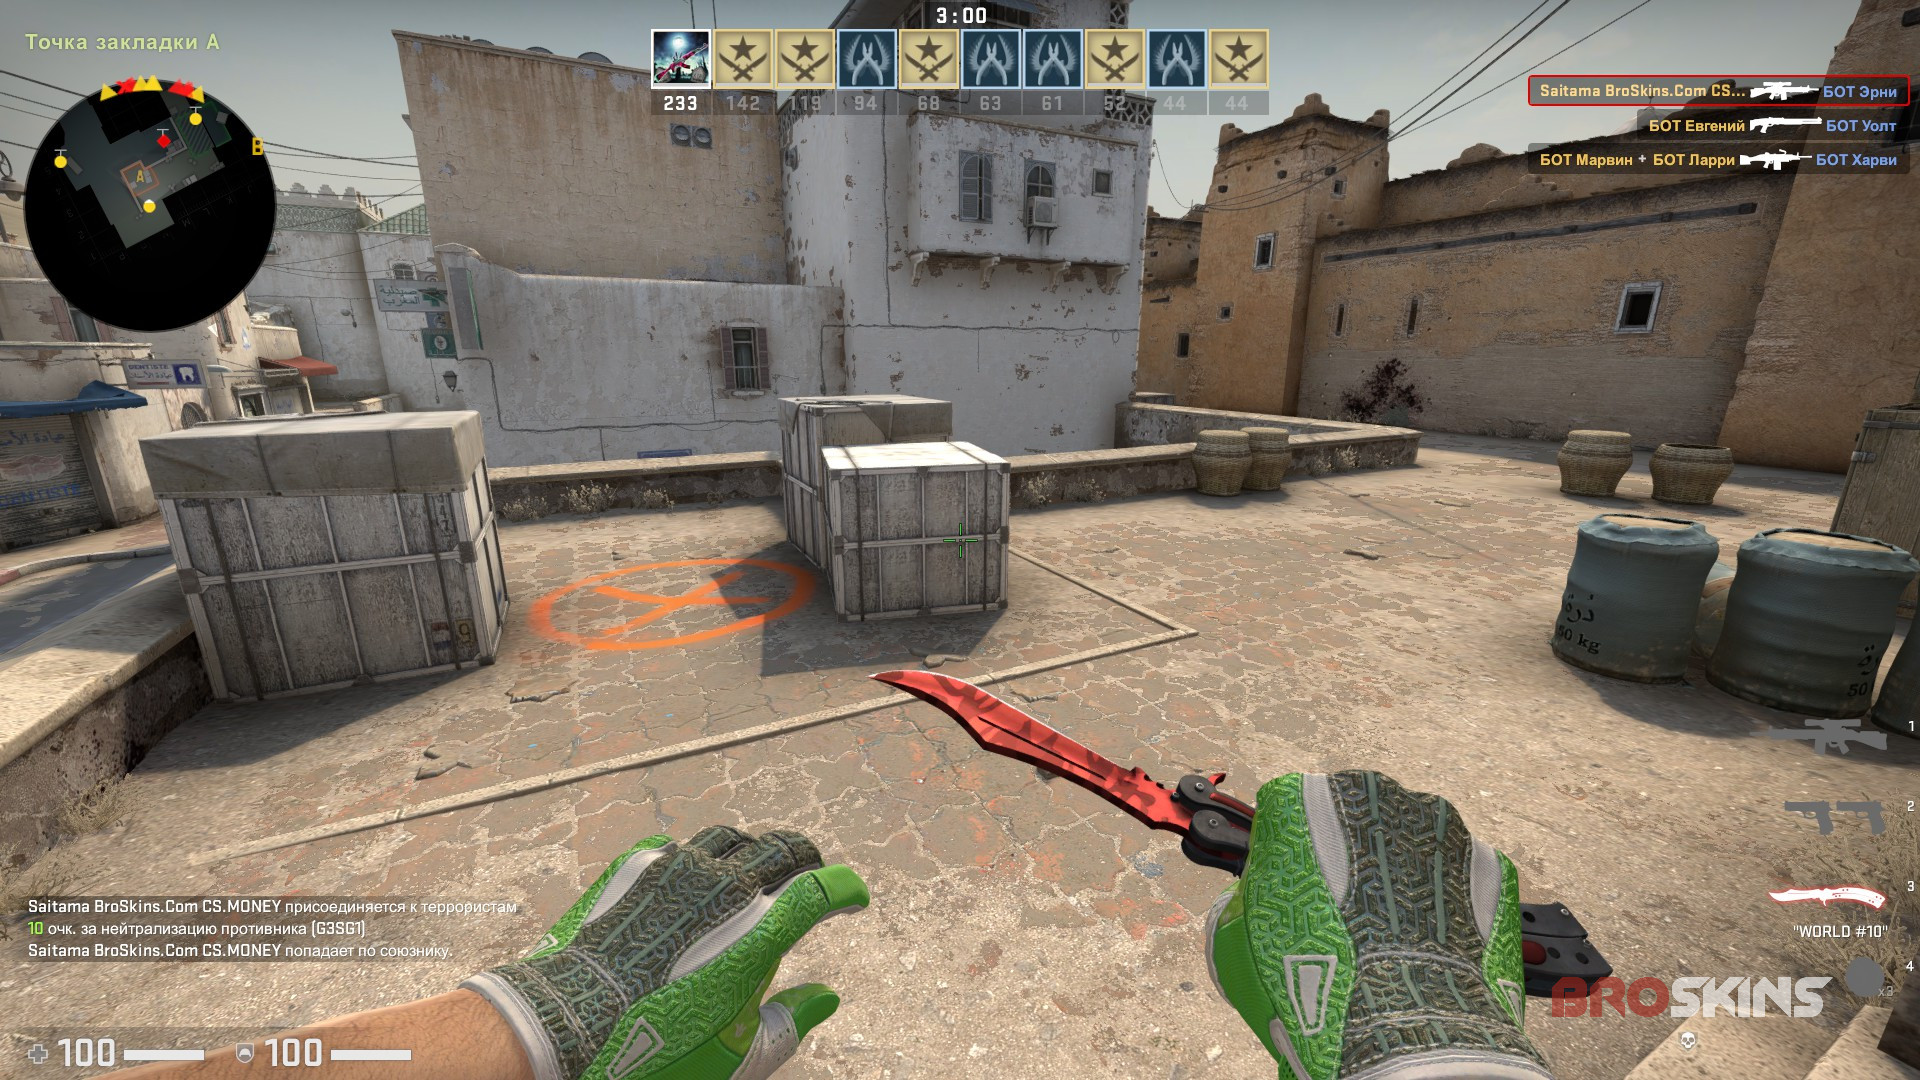 Butterfly Knife Slaughter + Sport Gloves Hedge Maze Factory New